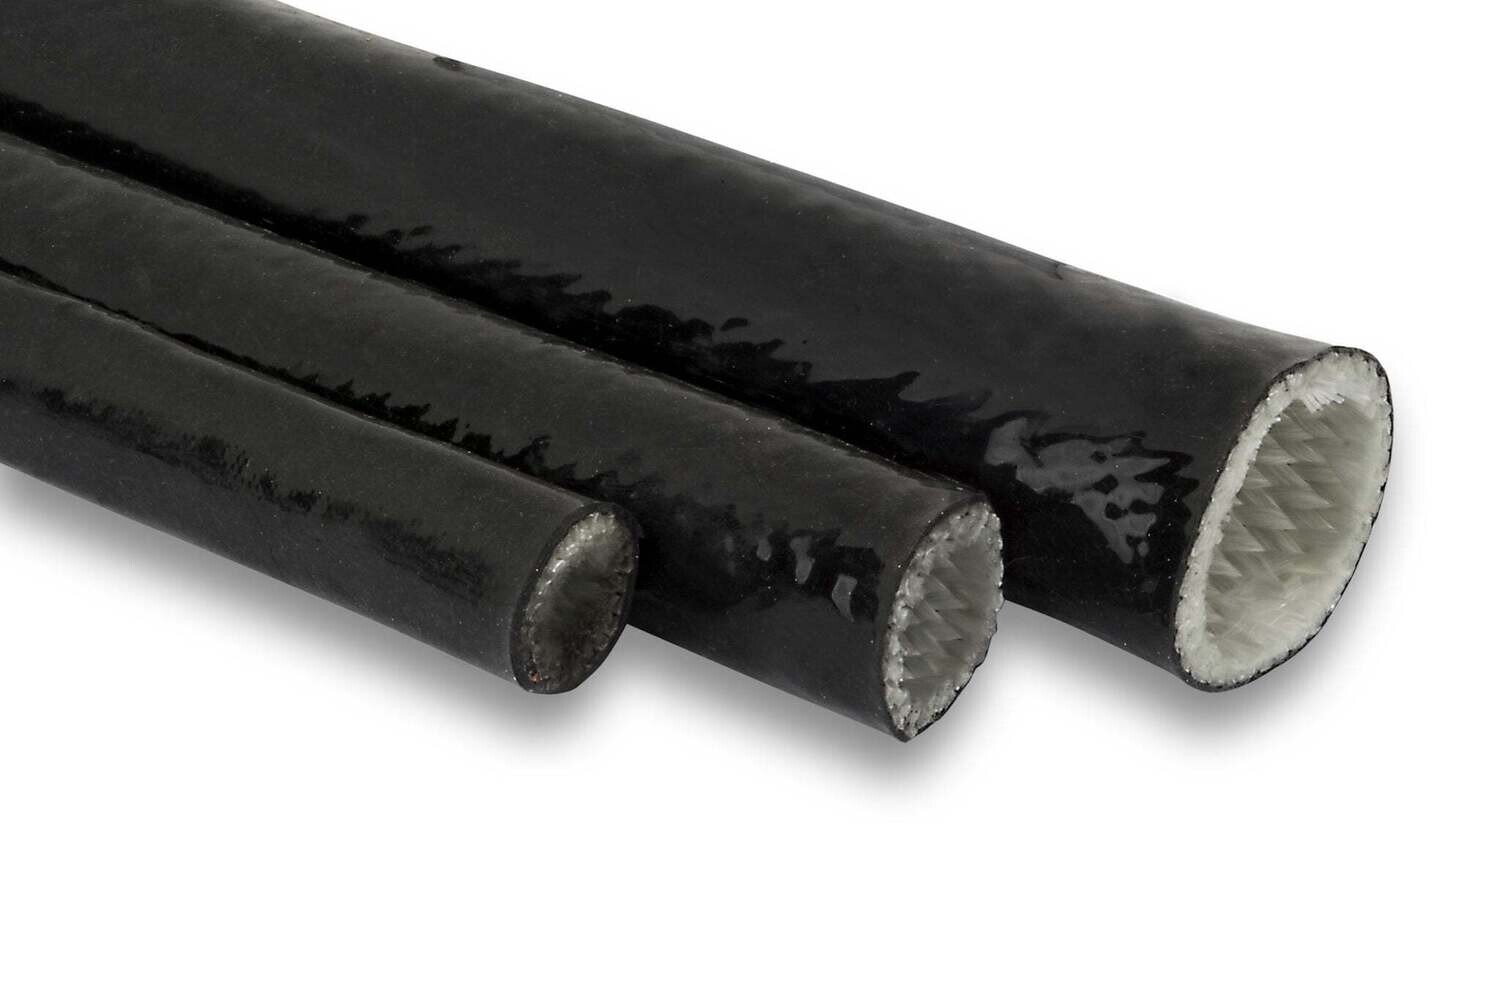 Black Silicon High Heat Sleeve - 35mm, 2.0m Multiple Qty will come on a continuous Roll